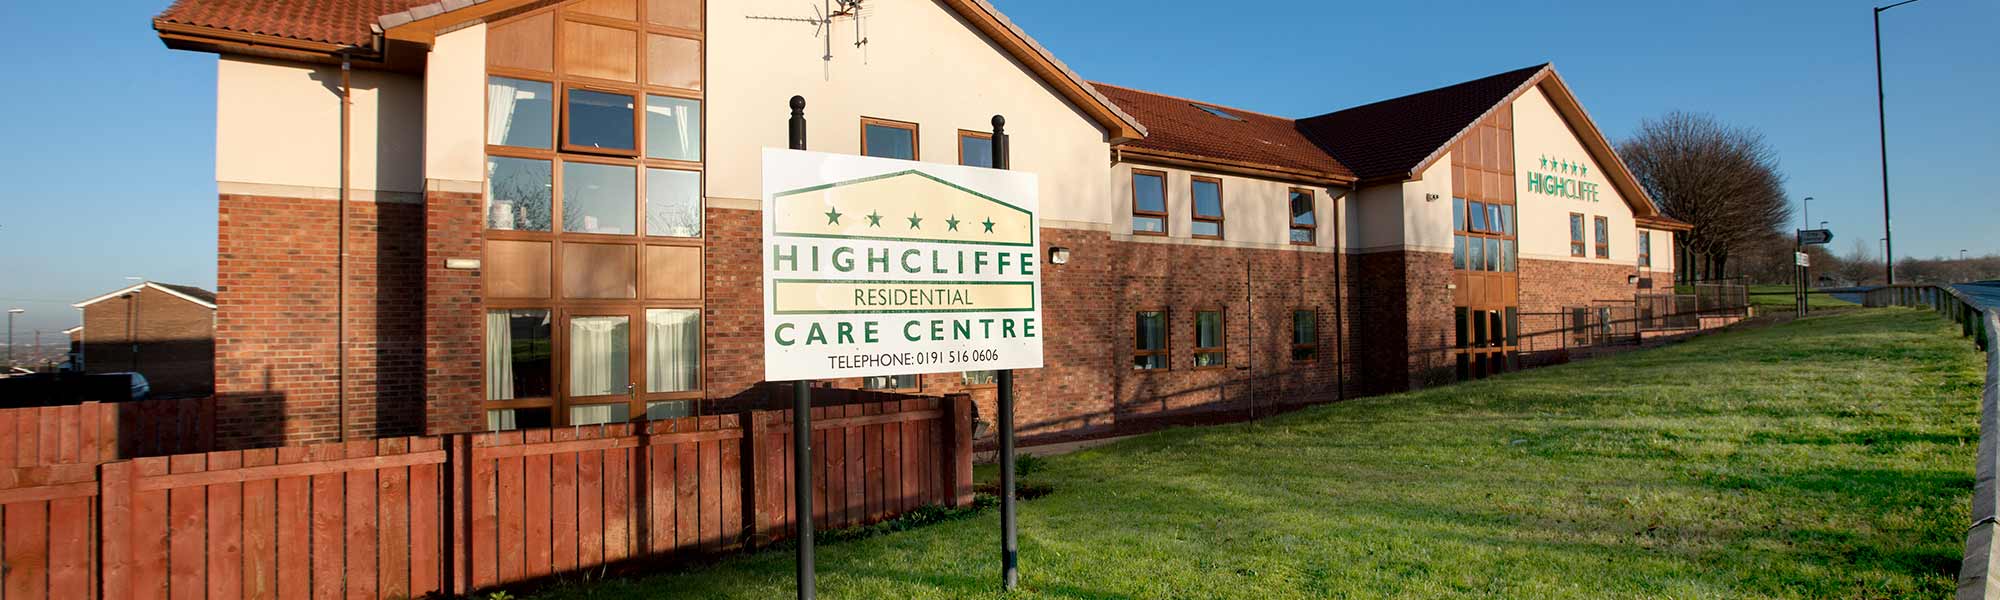 Our care home in Sunderland